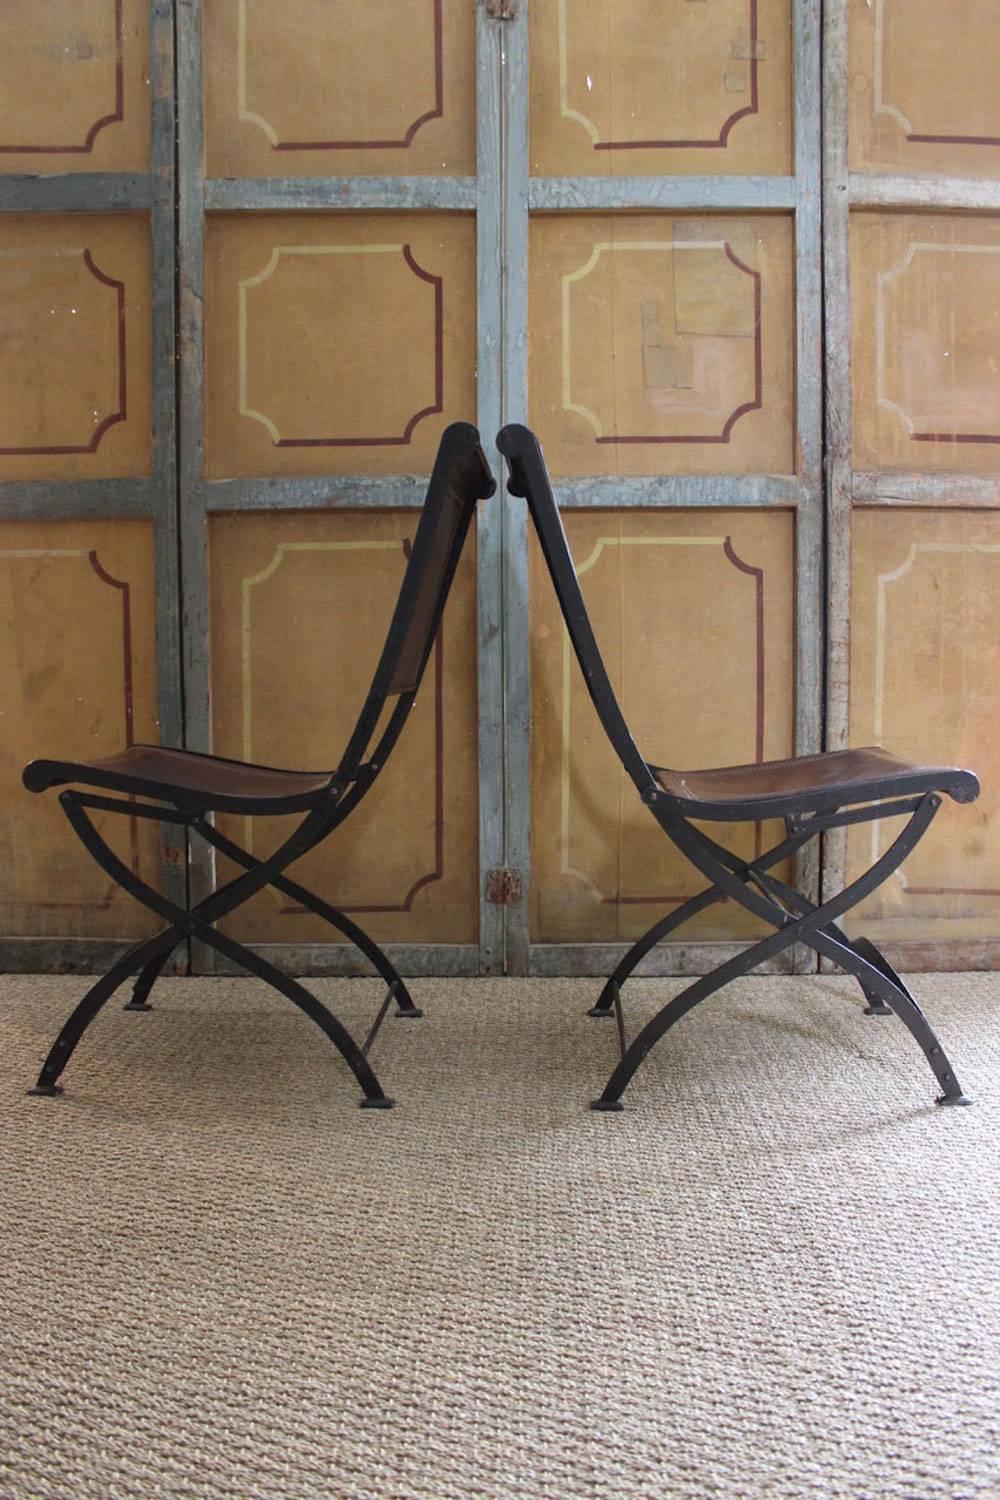 Painted Set of Six Italian Mid-20th Century Leather and Iron Folding Chairs